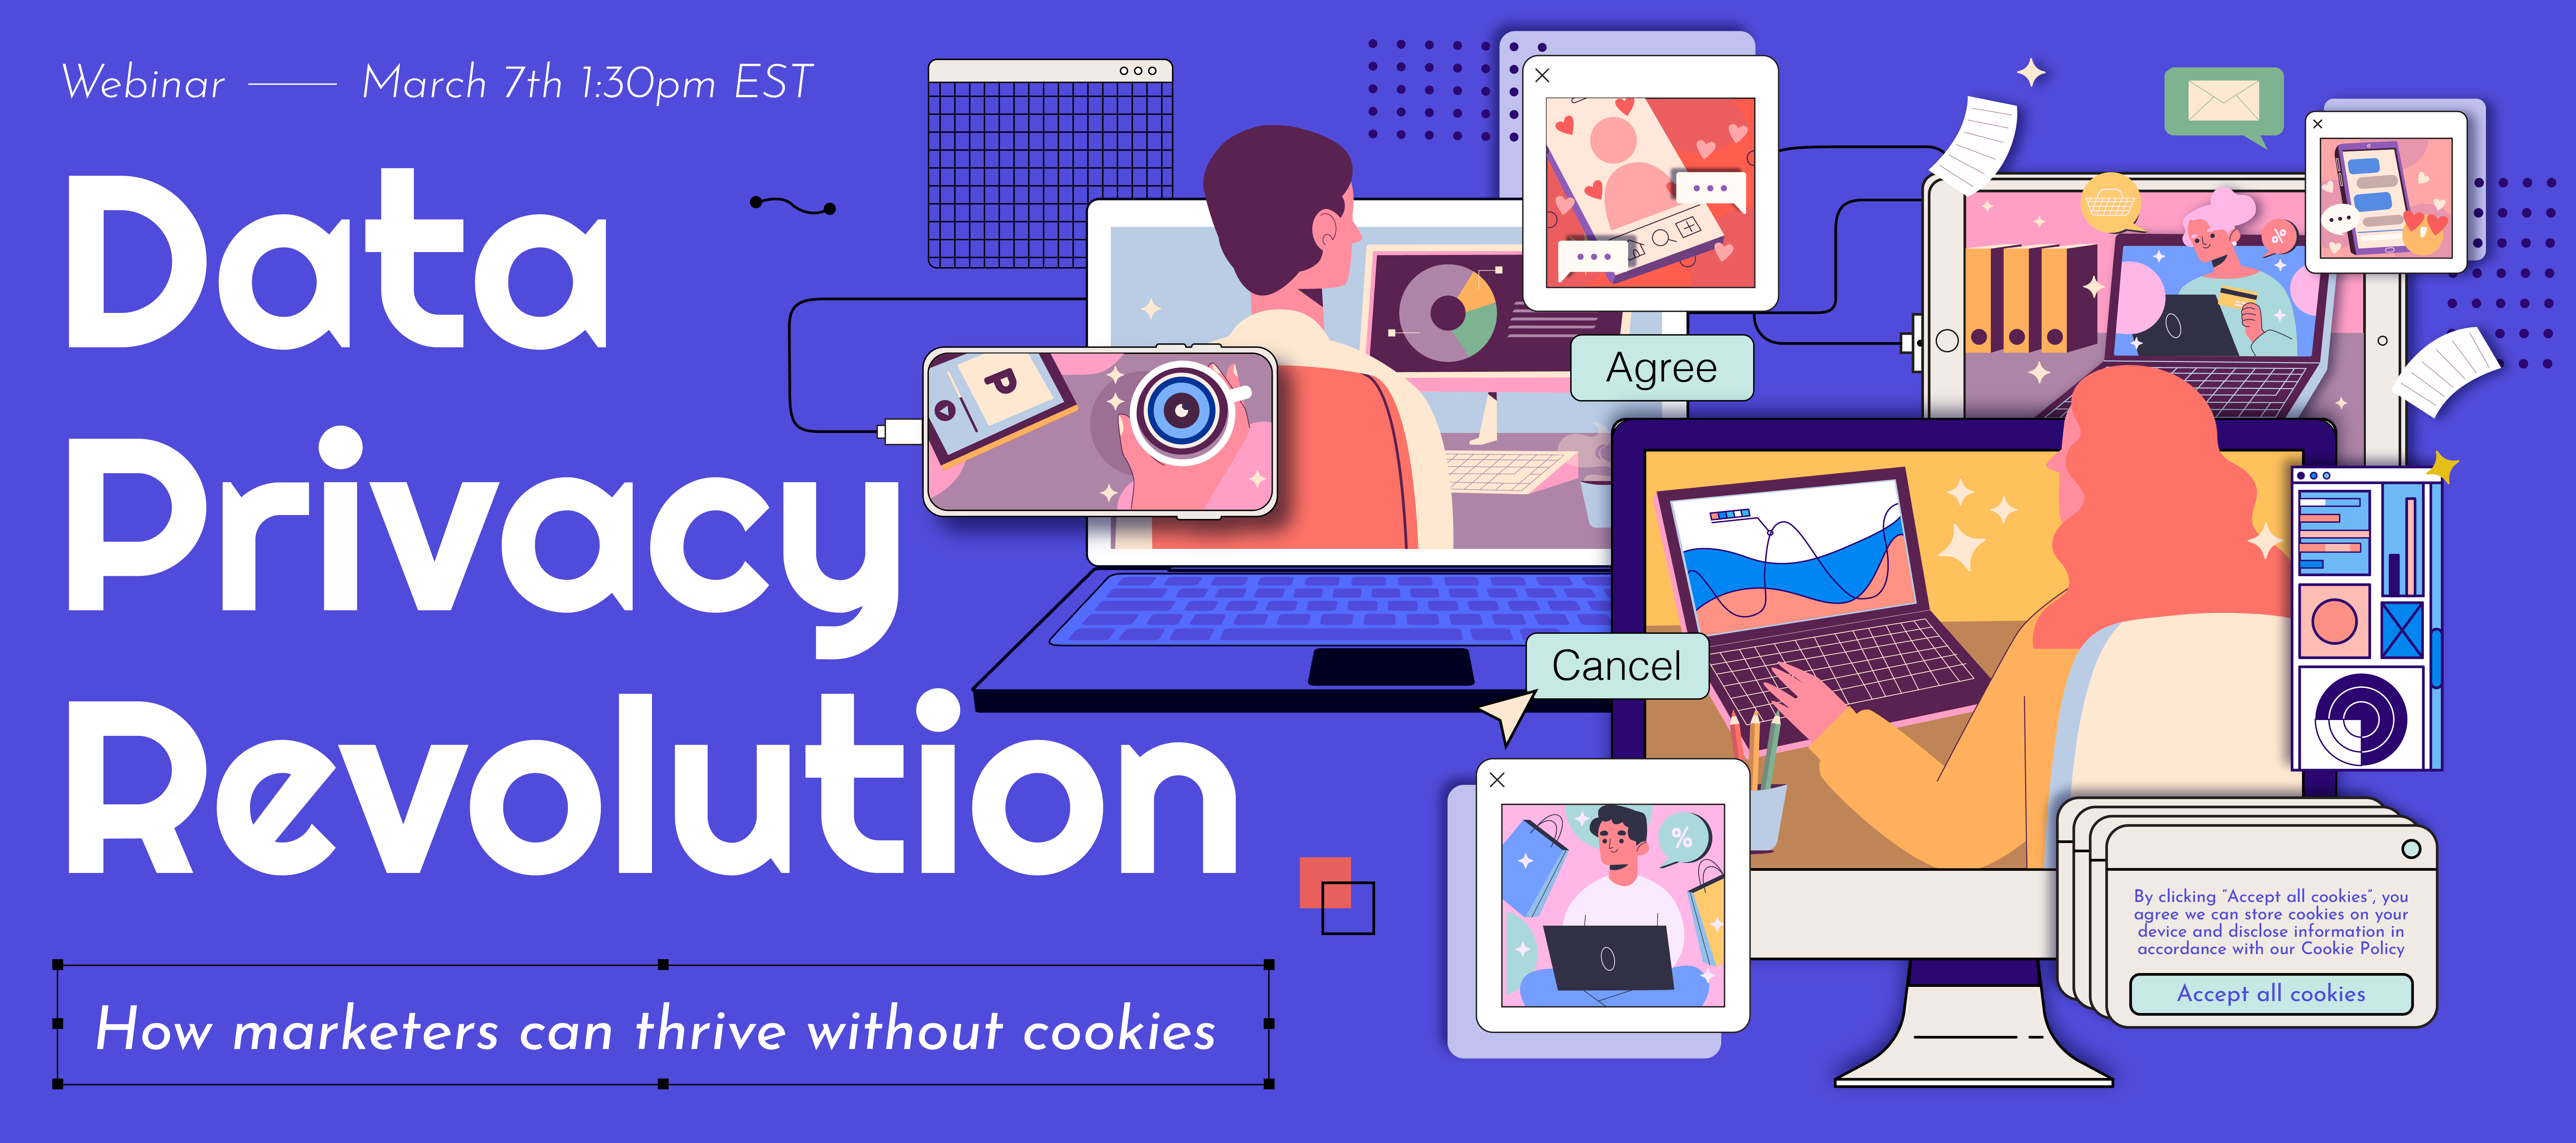 Data Privacy Revolution: How Marketers Can Thrive Without Cookies